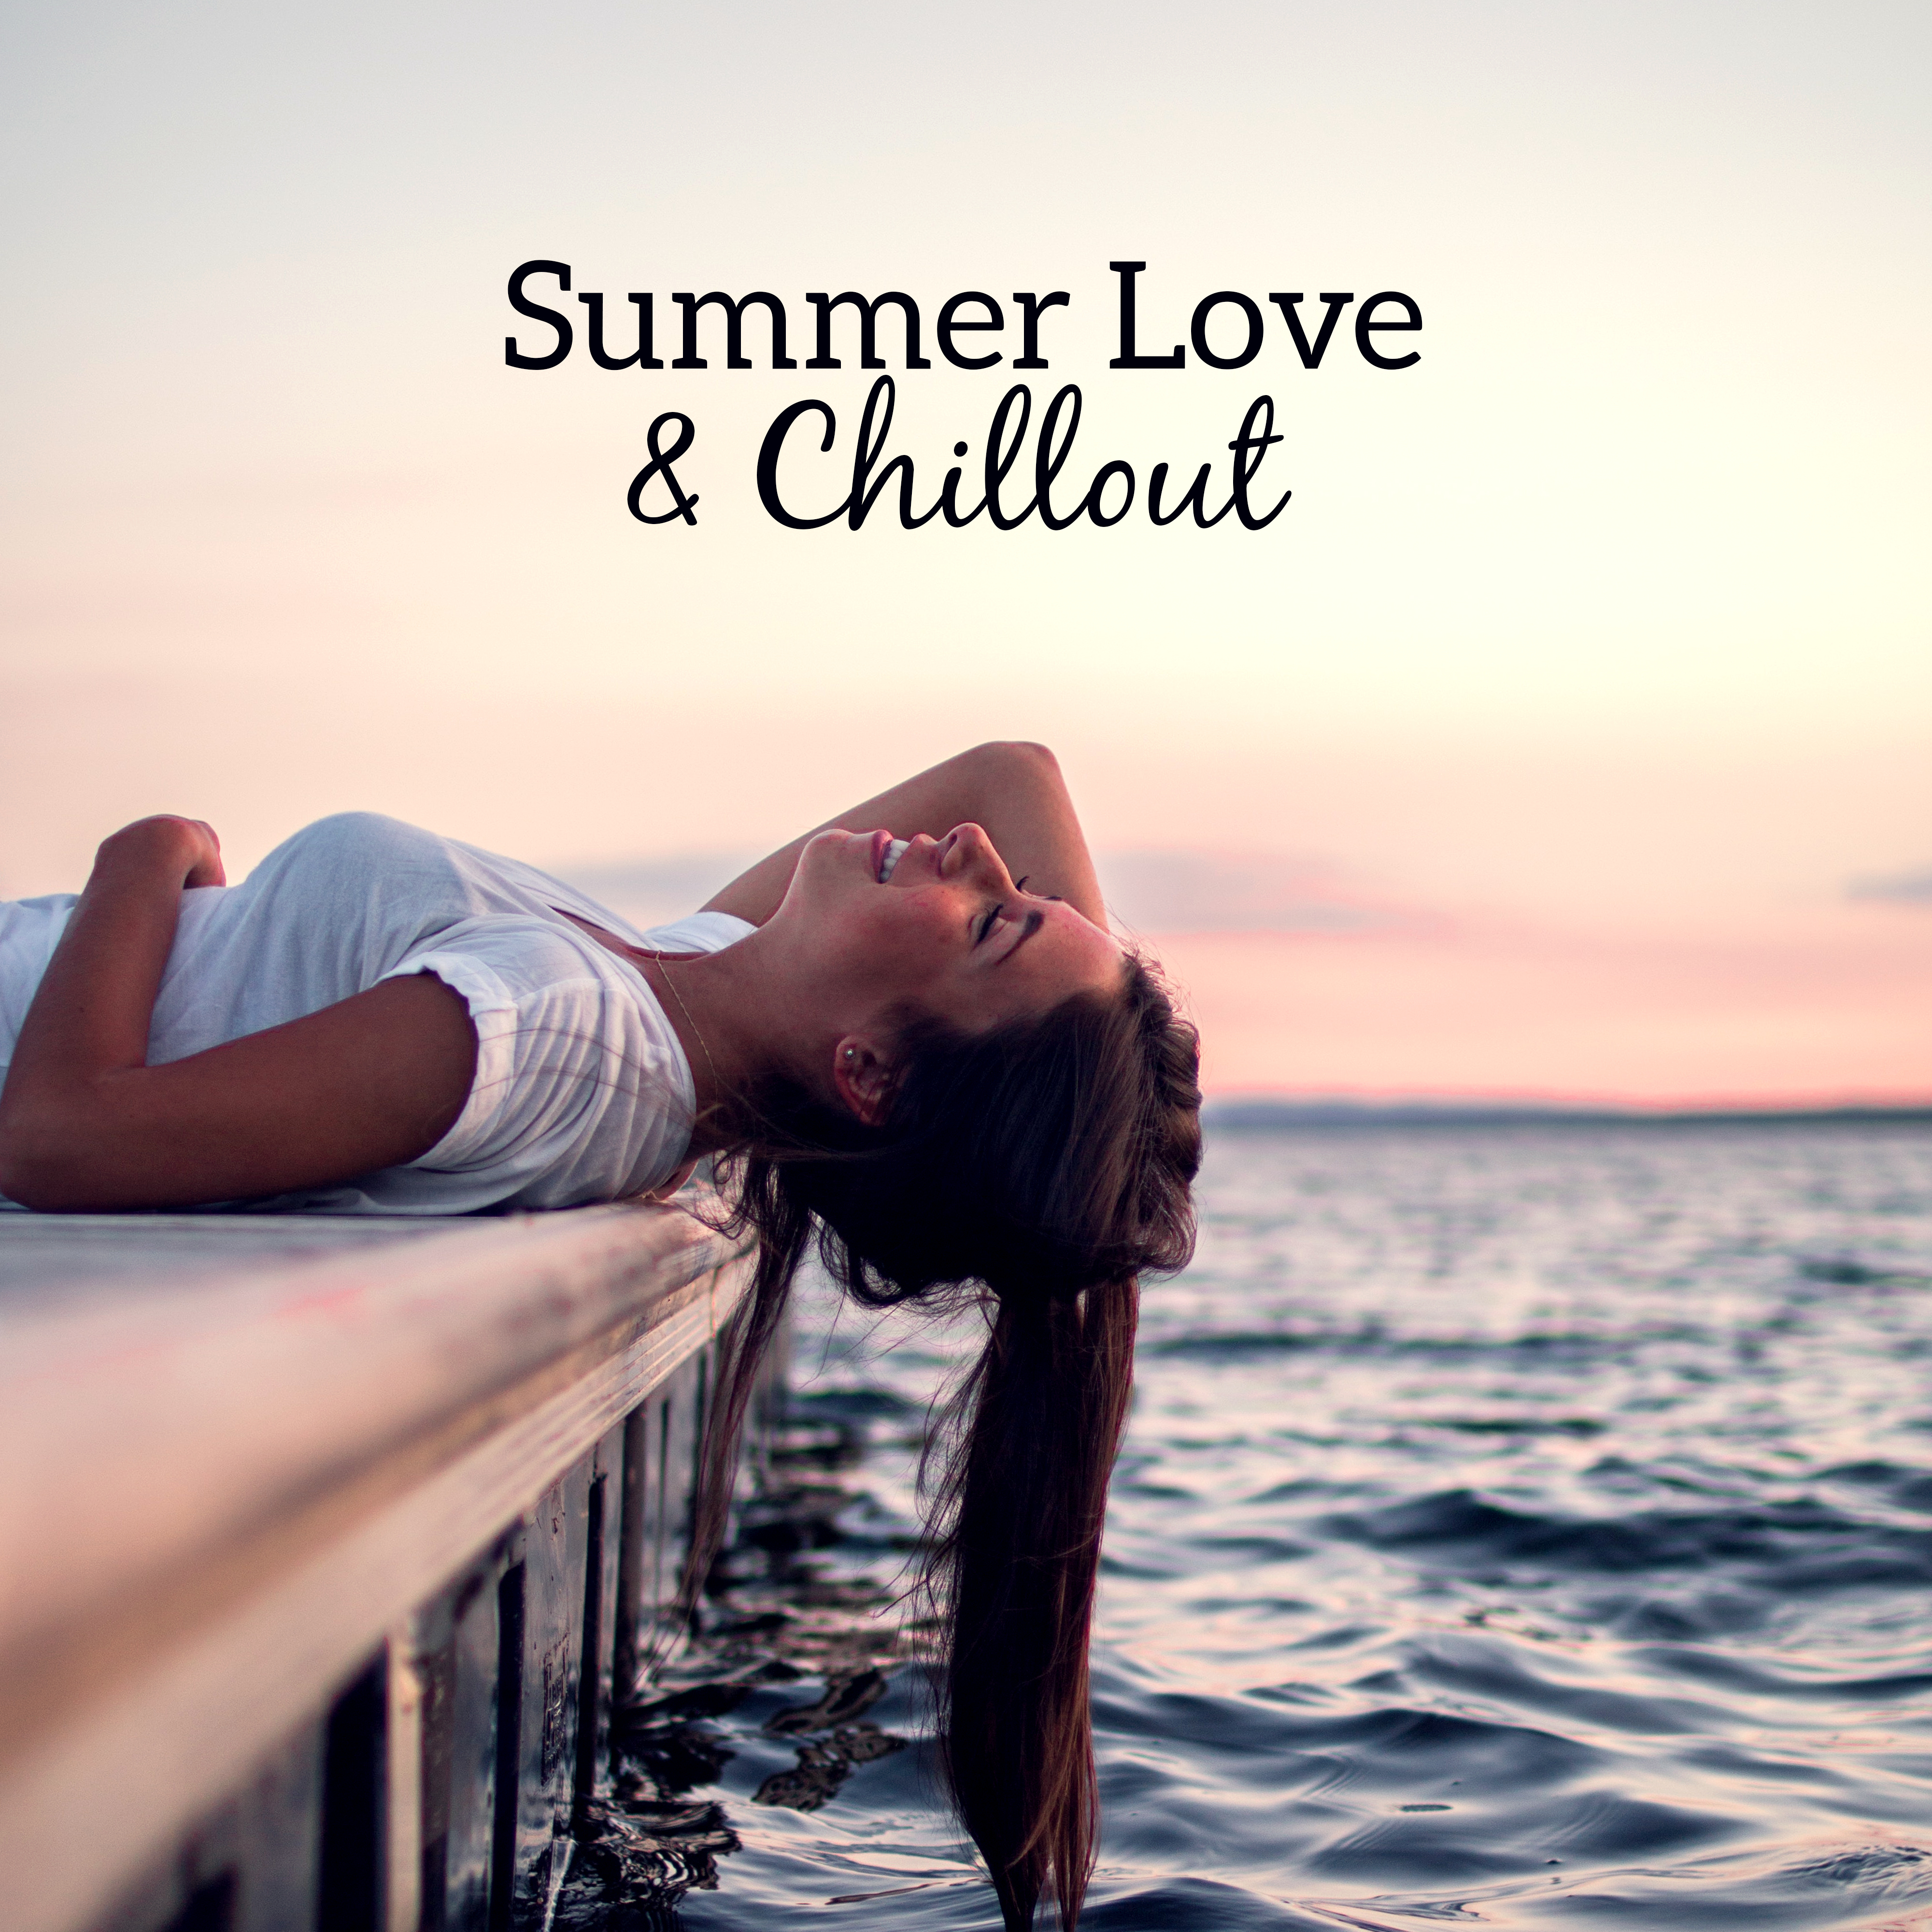 Summer Love & Chillout – Summer Hits, Chill Out 2017, Relax & Chill, Deep Beats